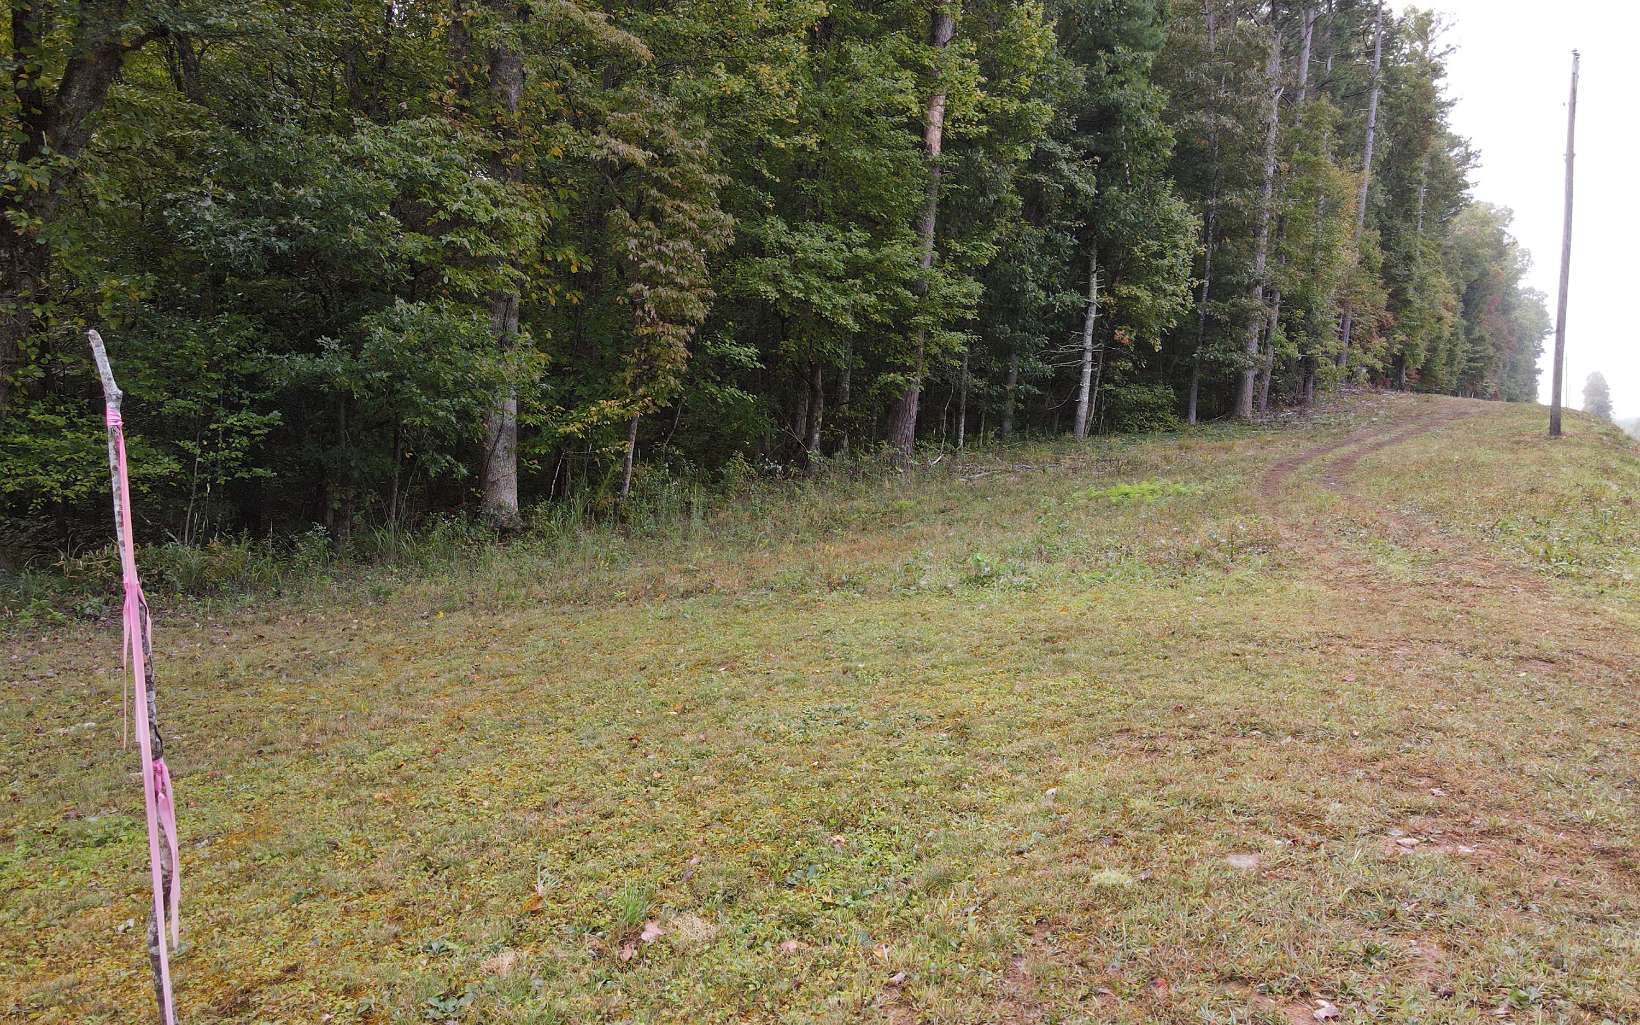 2.96 Unrestricted Acres. Conveniently located only 10.5 miles from downtown Blue Ridge and 19 miles from the casino in Murphy, NC. Close to the McCaysville/Copperhill area for shopping and eats. Possibilities on this gentle laying land are endless. Make your dreams come true with this tract and check it out!